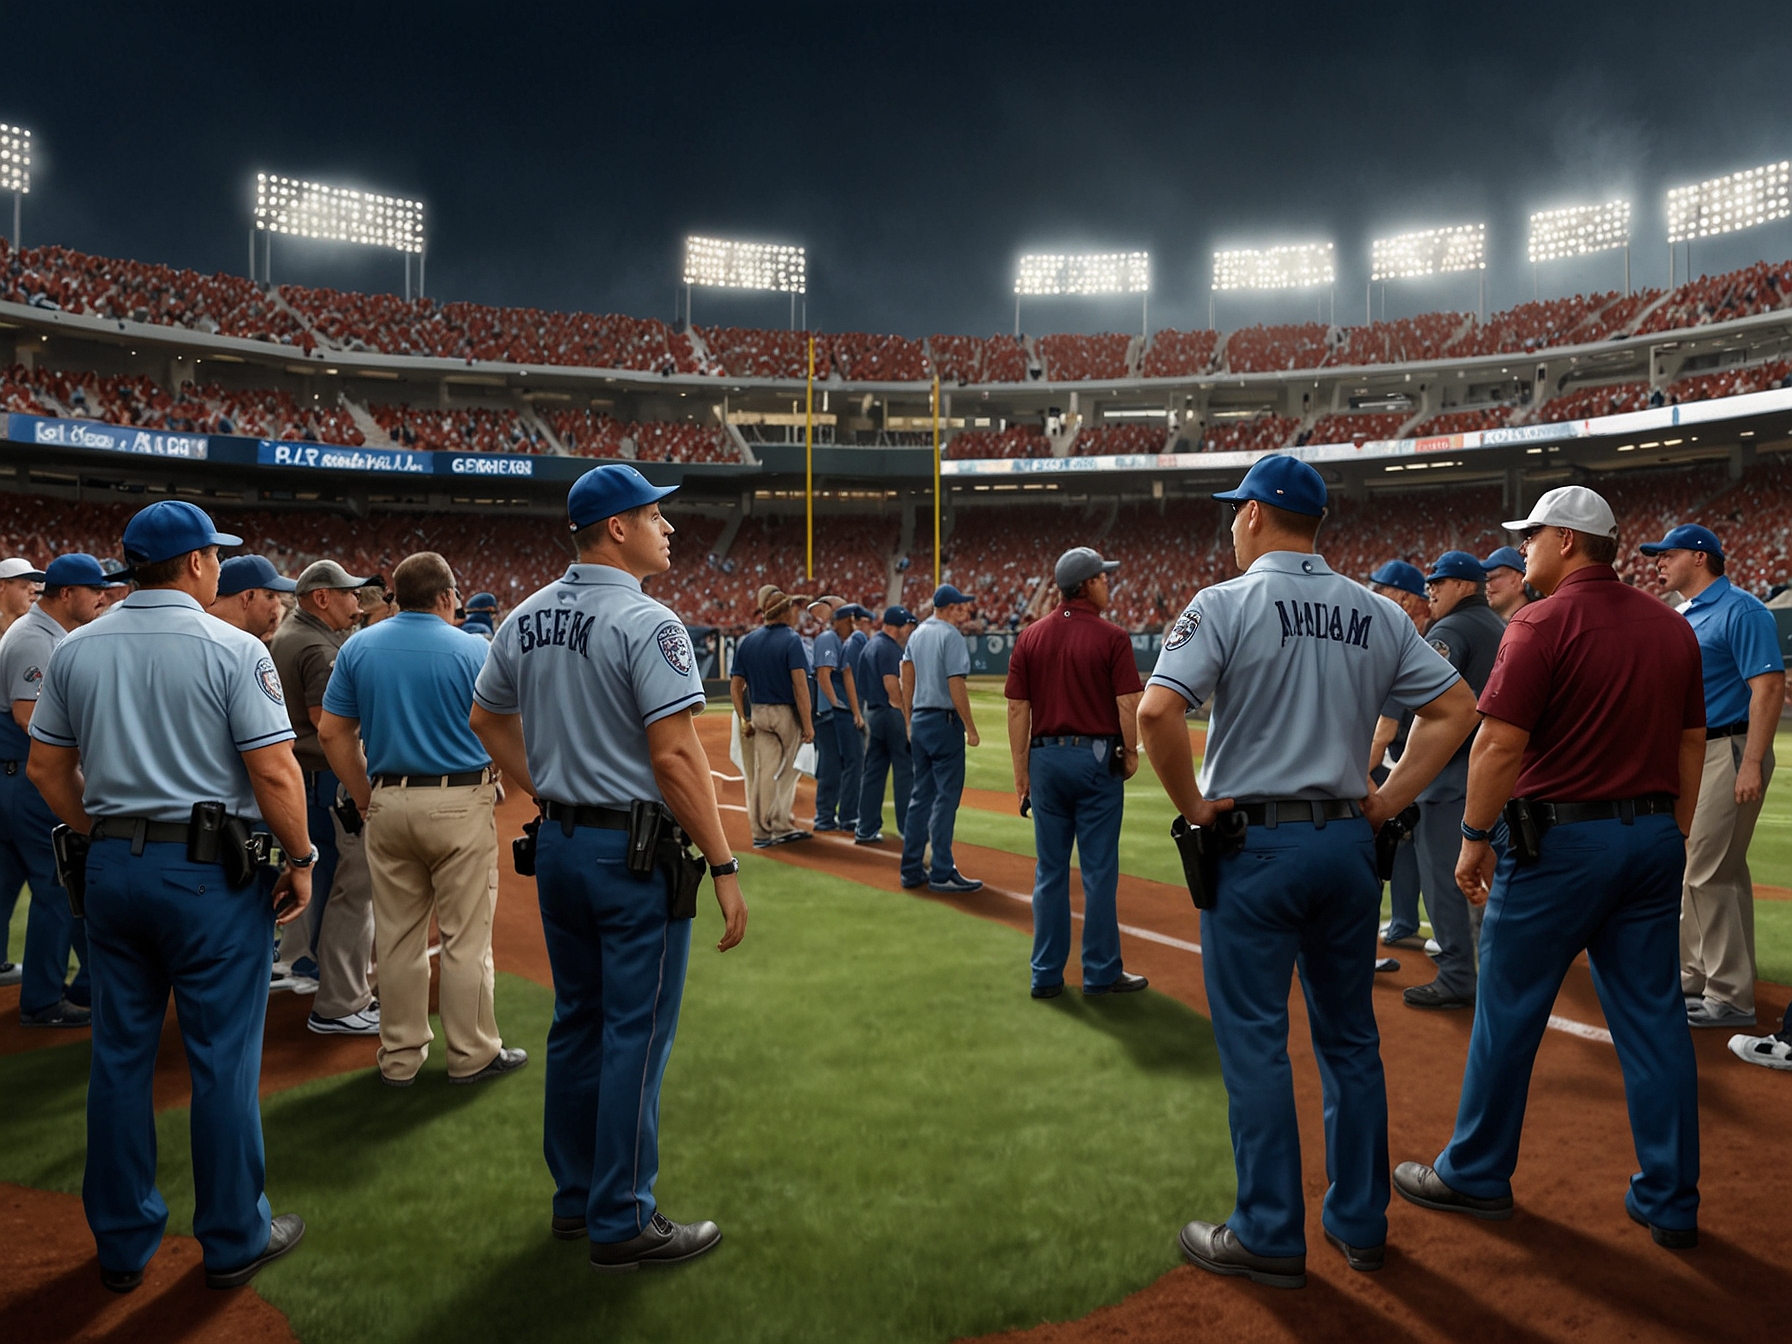 Stadium security intervenes as Texas A&M supporters and Florida players engage in heated exchanges, capturing the volatility of sports rivalries at the College World Series game.